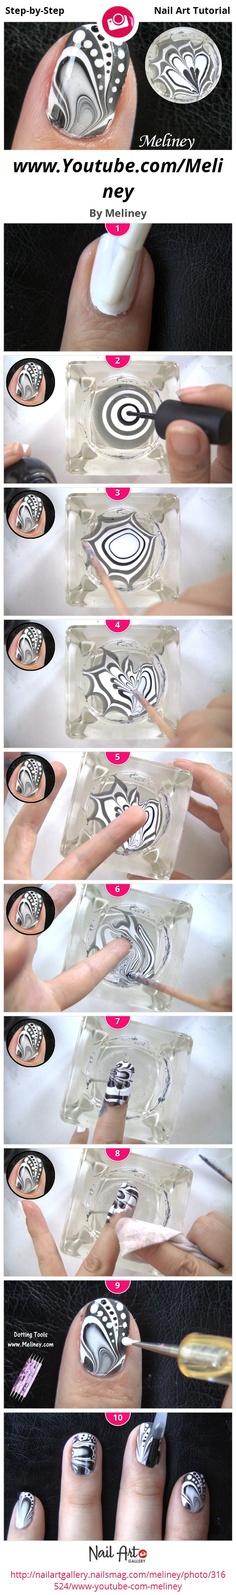 22 New Nails Tutorials you have to try (25)